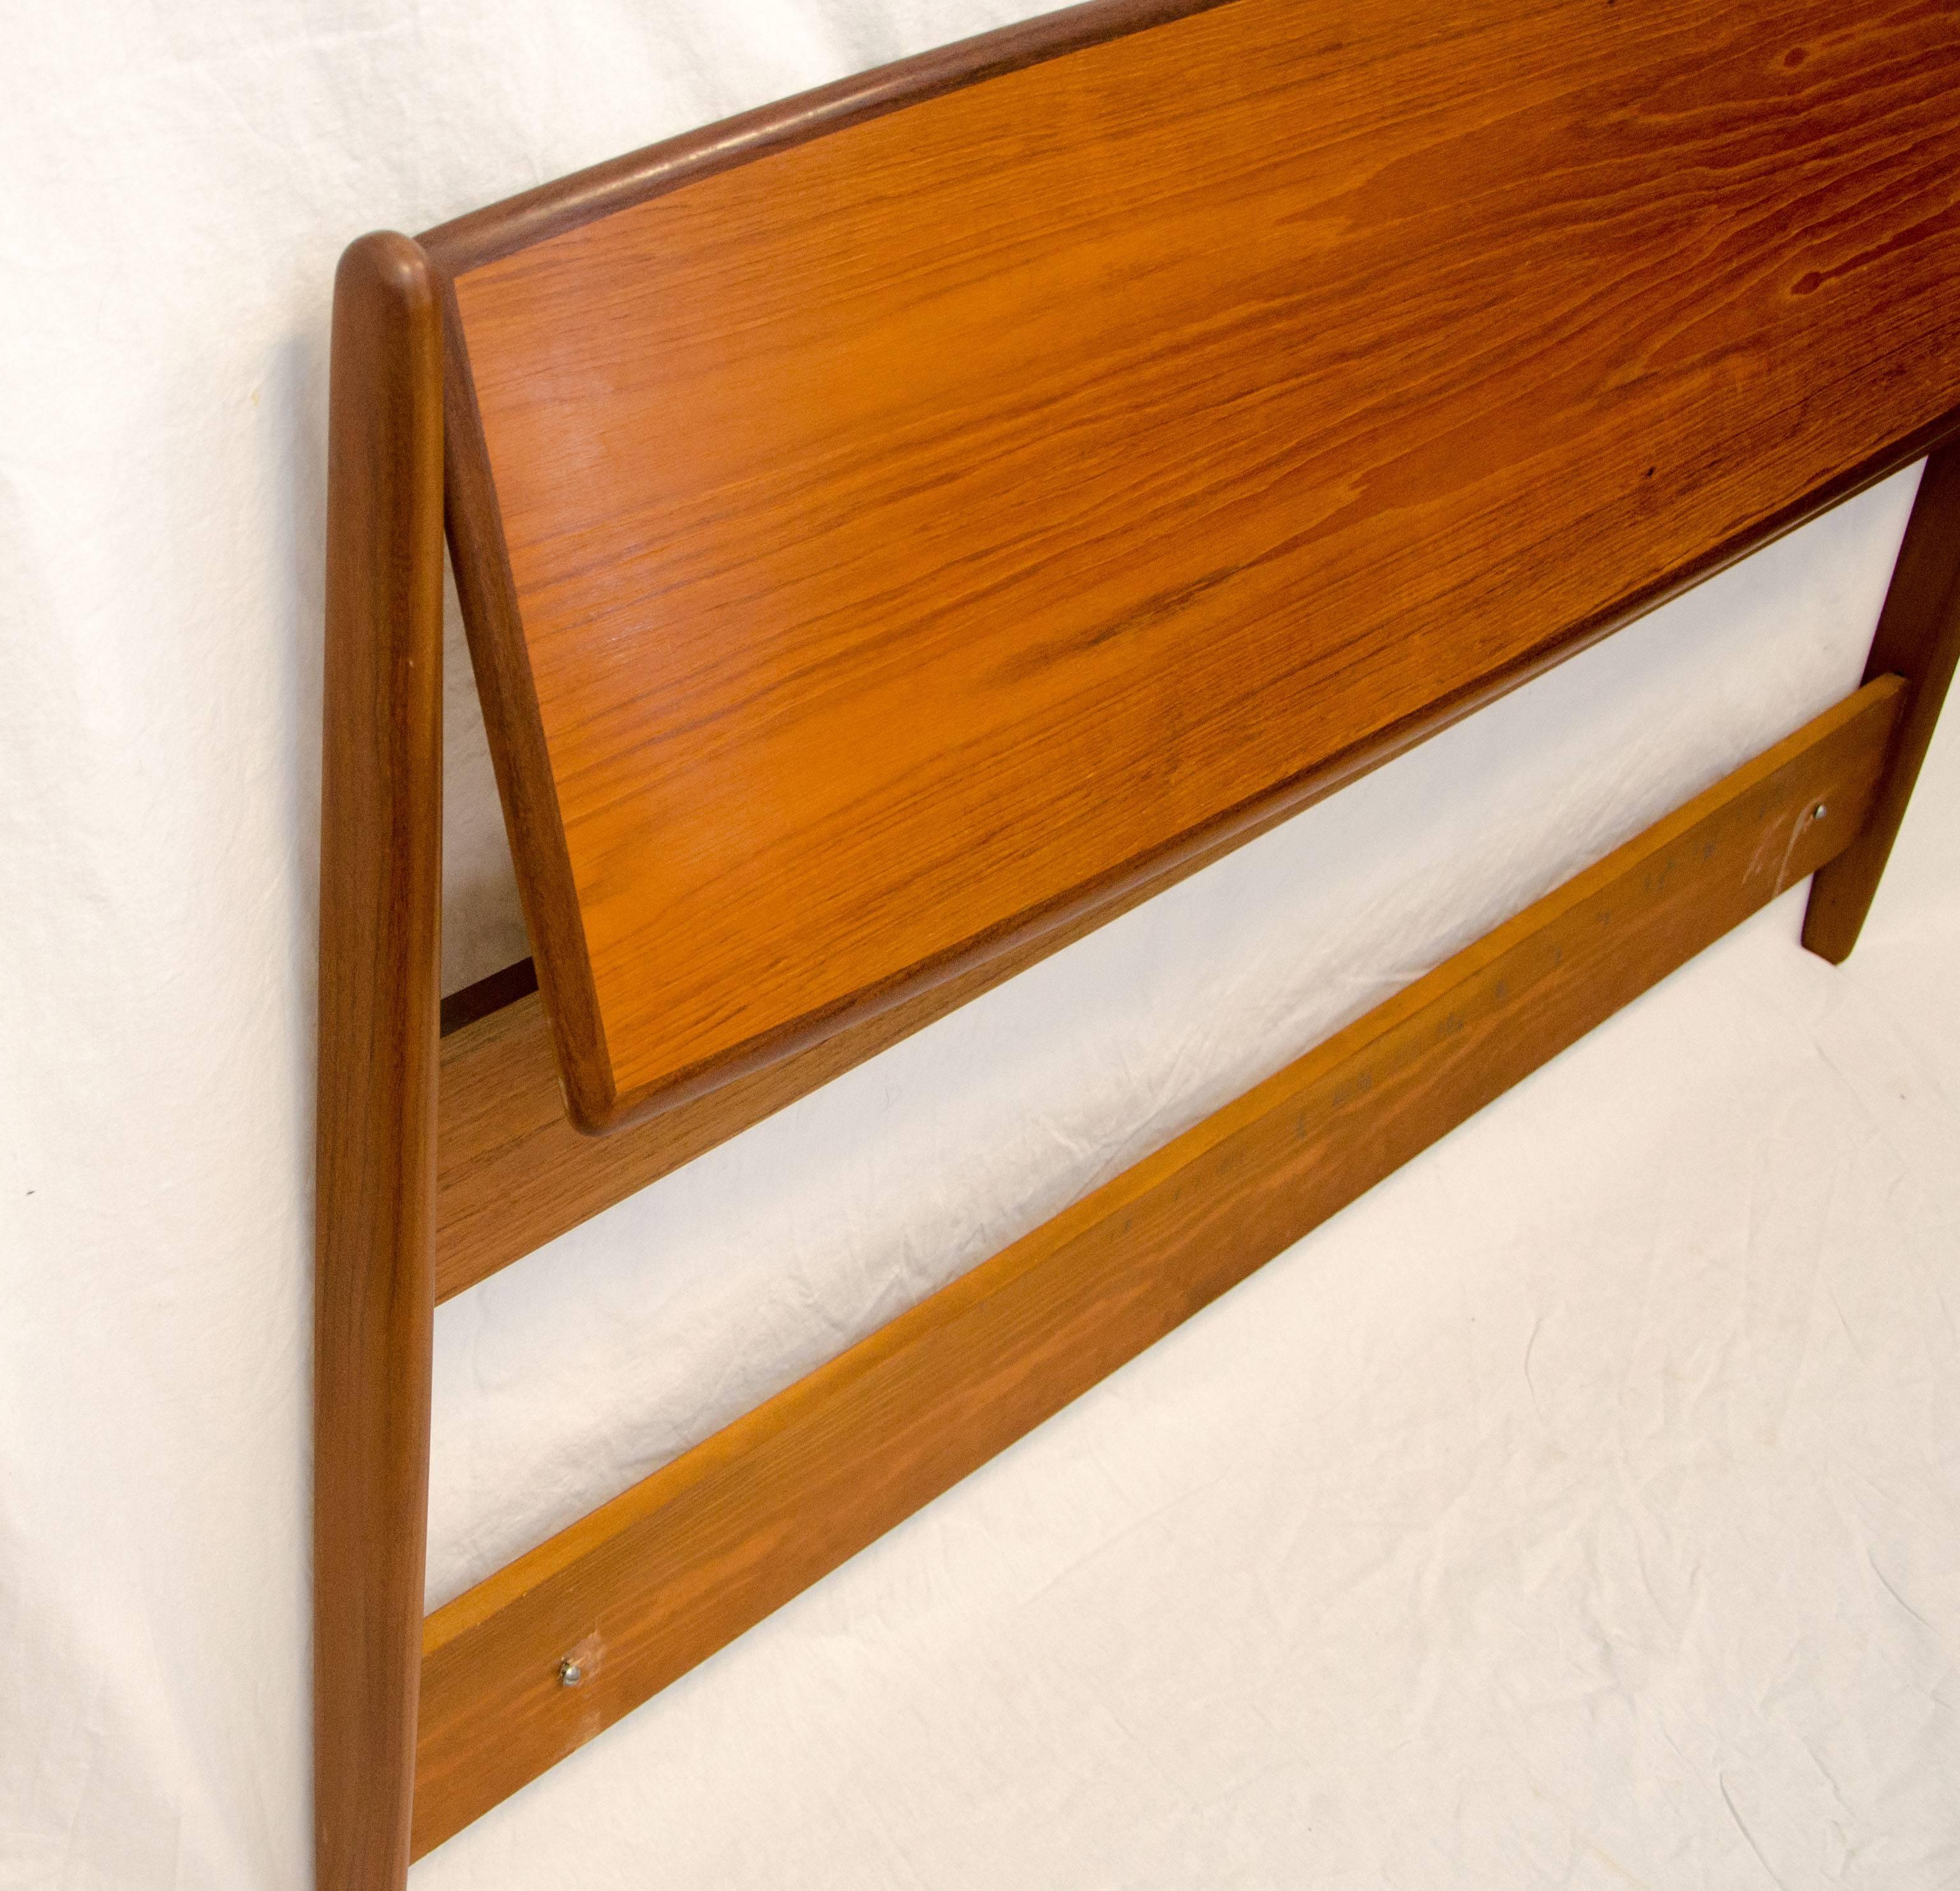  Nice queen size Danish teak headboard with walnut edge accents. Headboard tilts for sitting up or reading in bed.